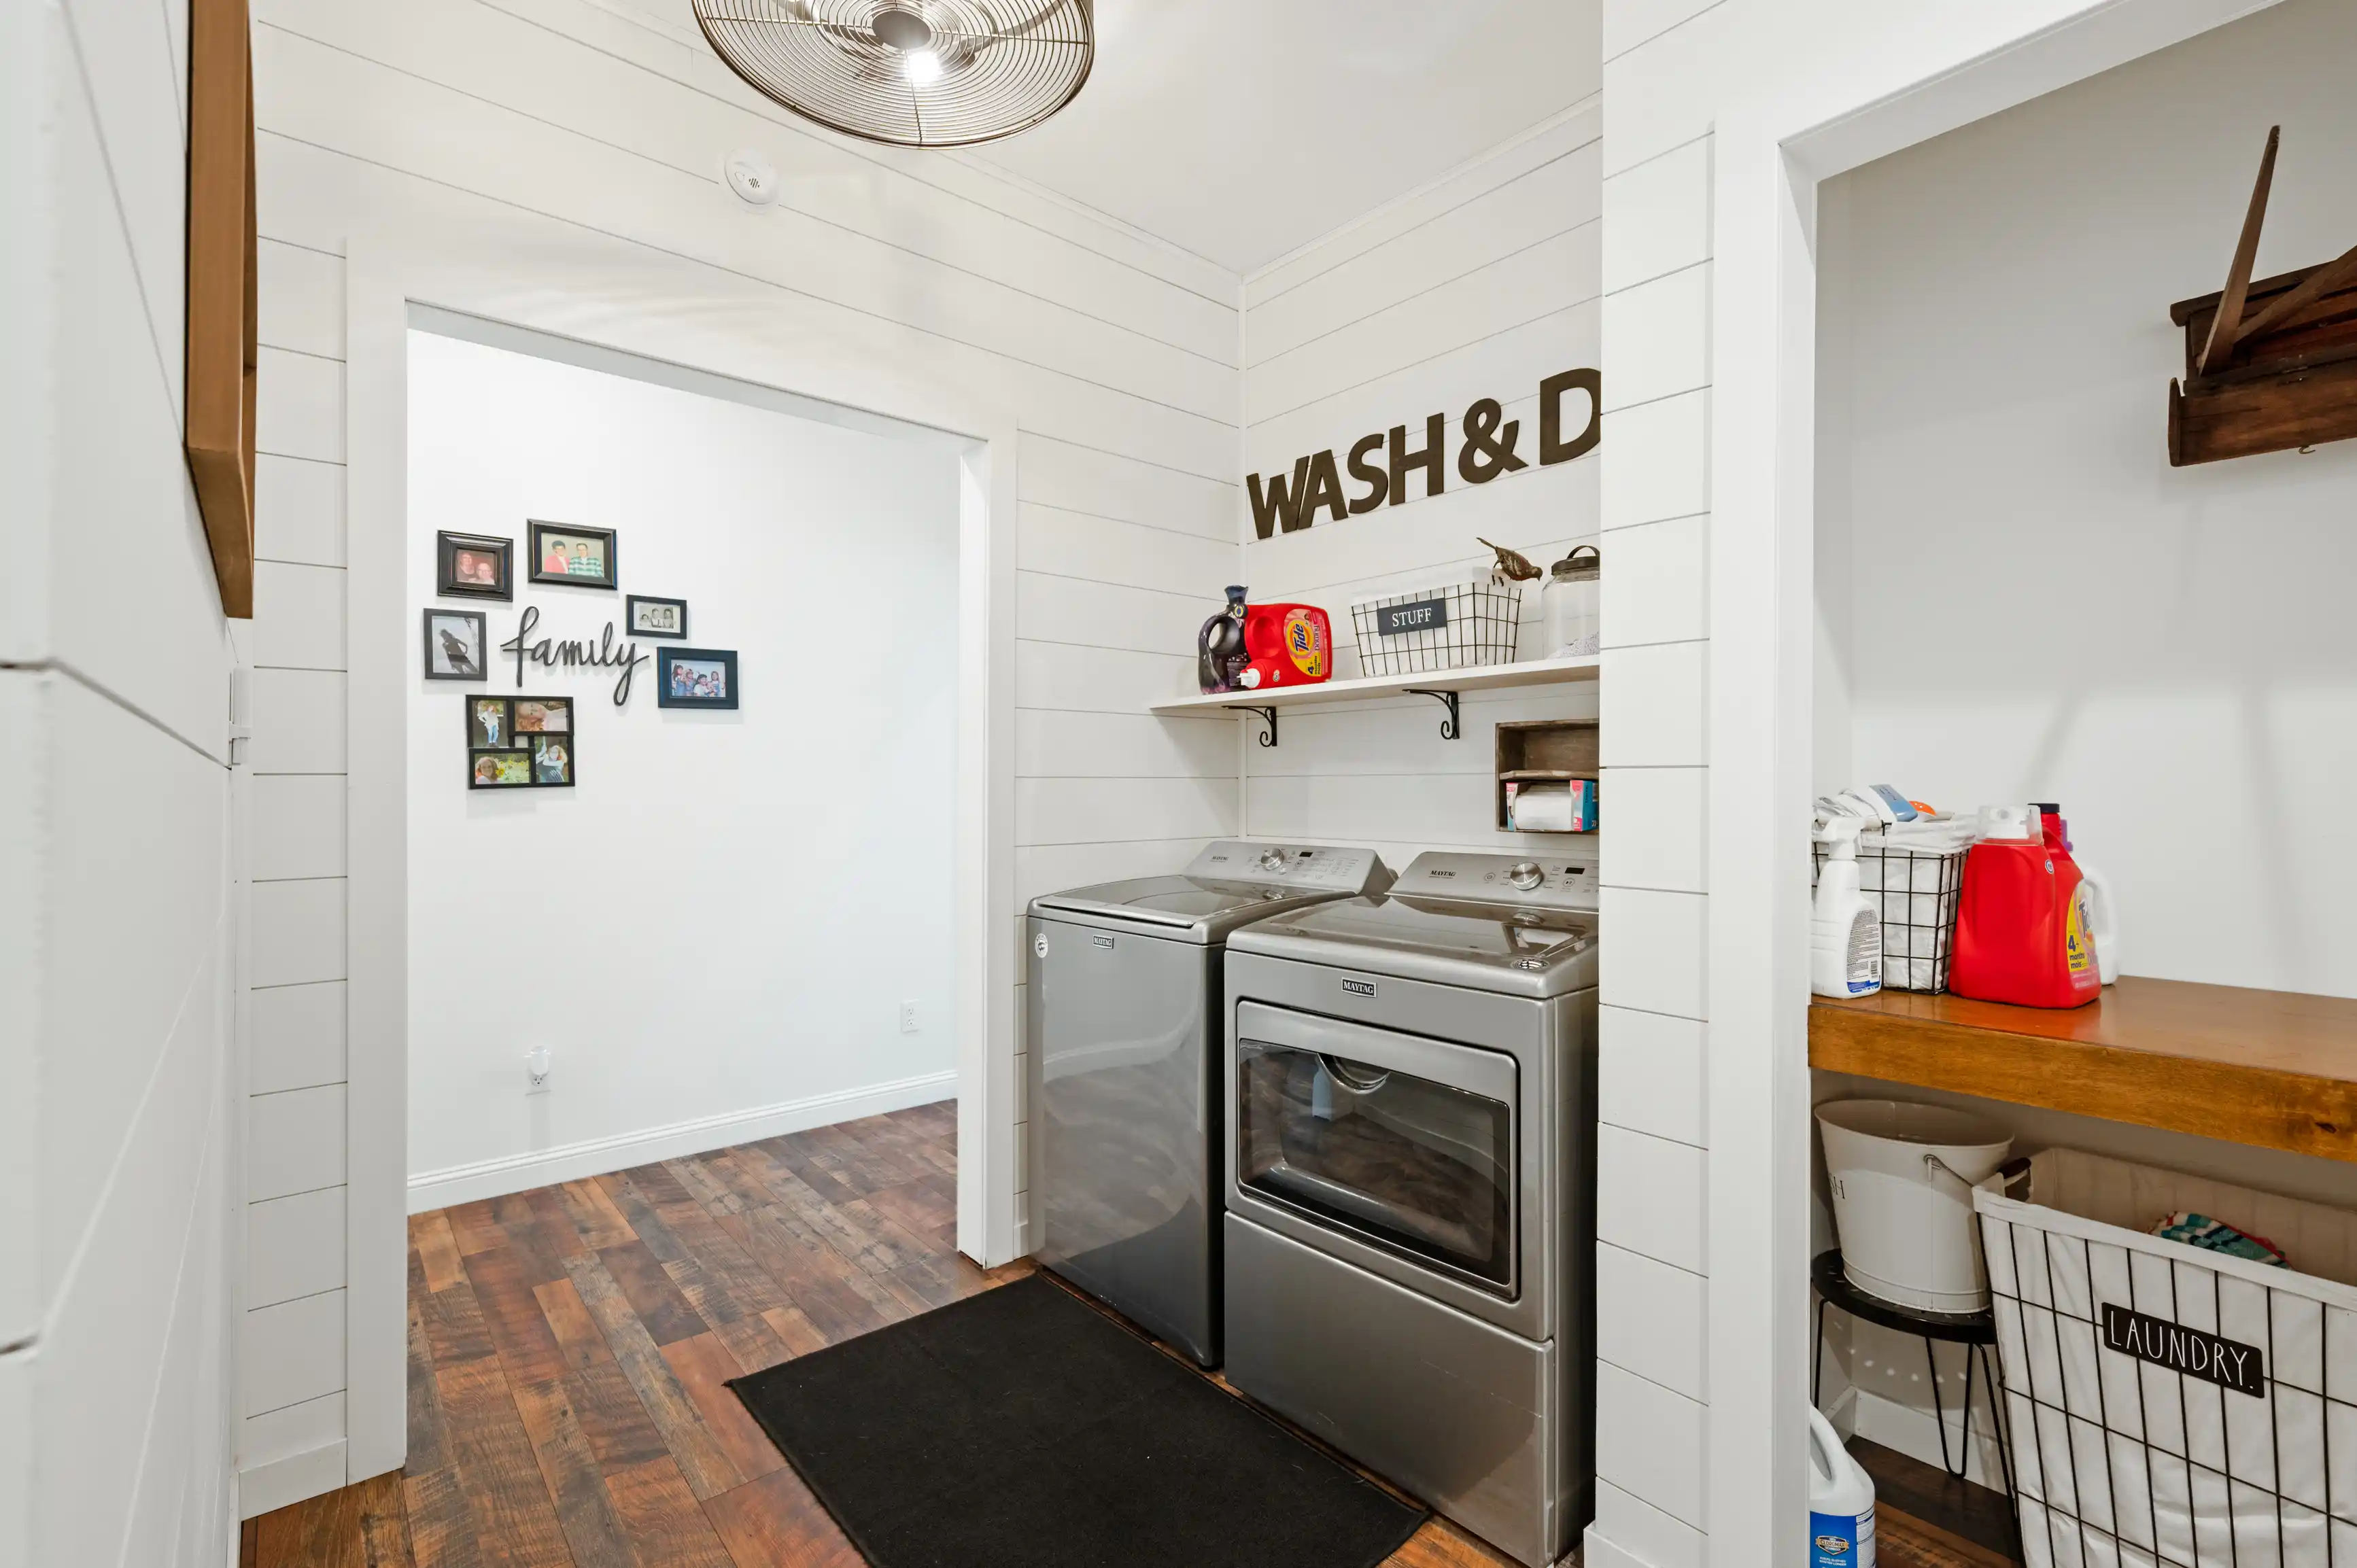 Bright and modern laundry room with white shiplap walls, stainless steel washer and dryer, wooden countertop, open shelving with supplies, and decorative 'WASH & DRY' lettering on the wall.